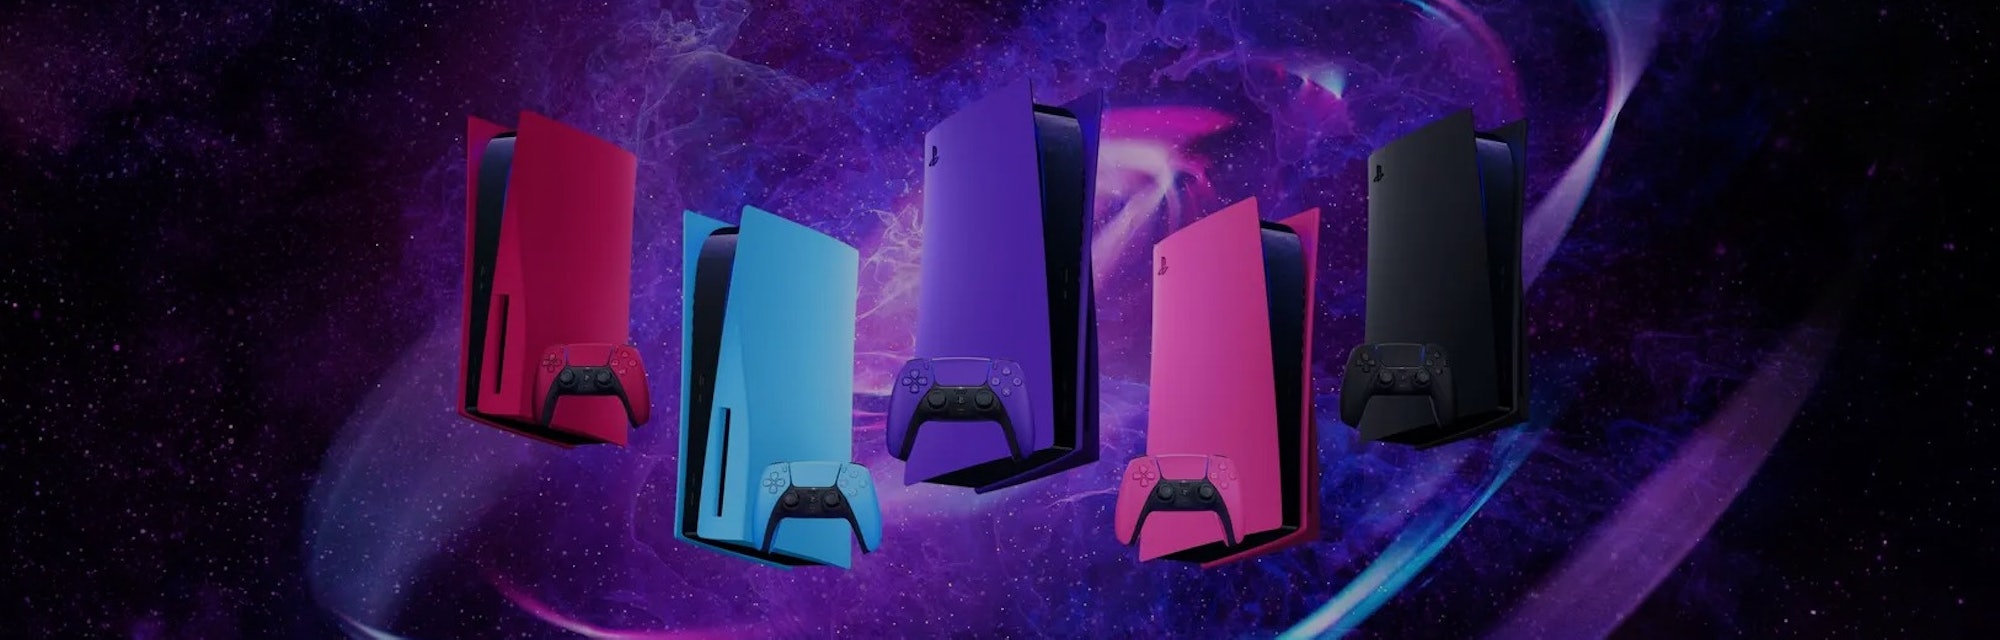 Official color face plates for Sony PS5